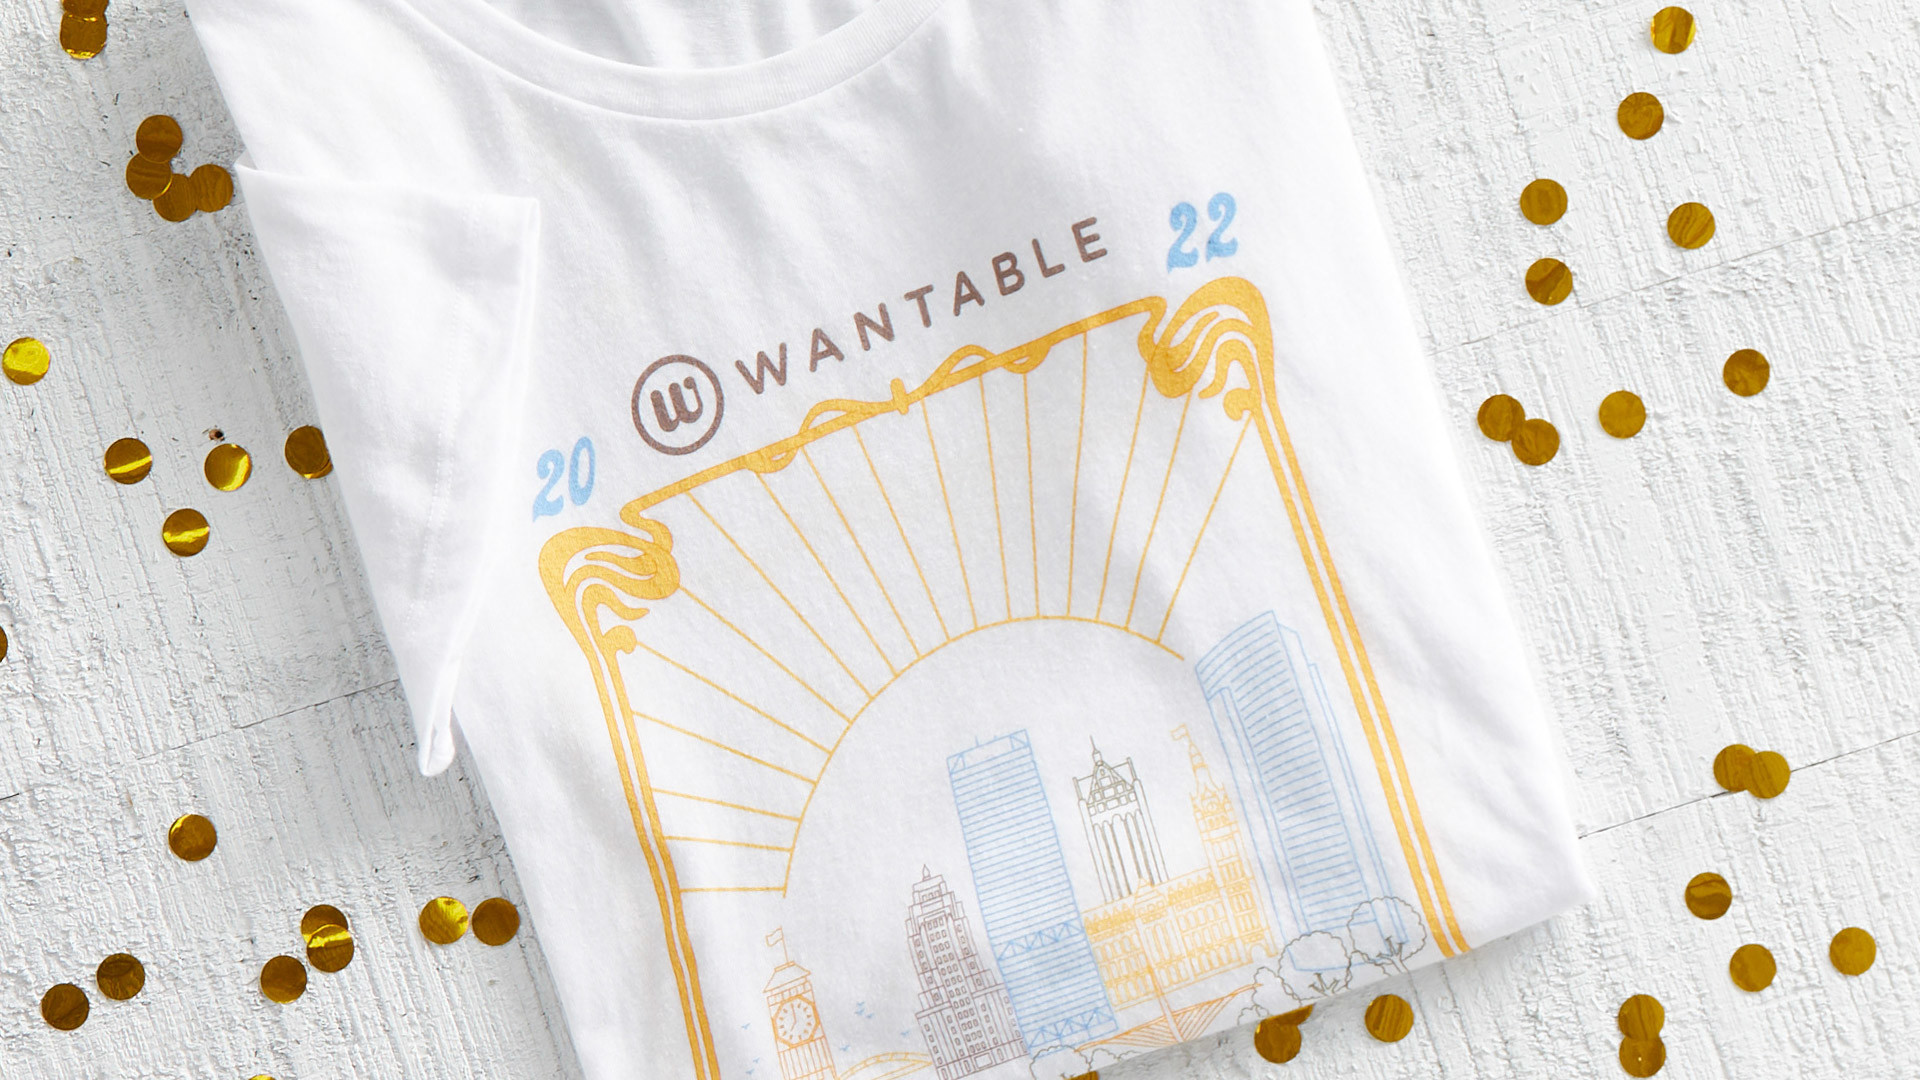 Wantable 10th birthday themed edit with golden ticket giveaway.